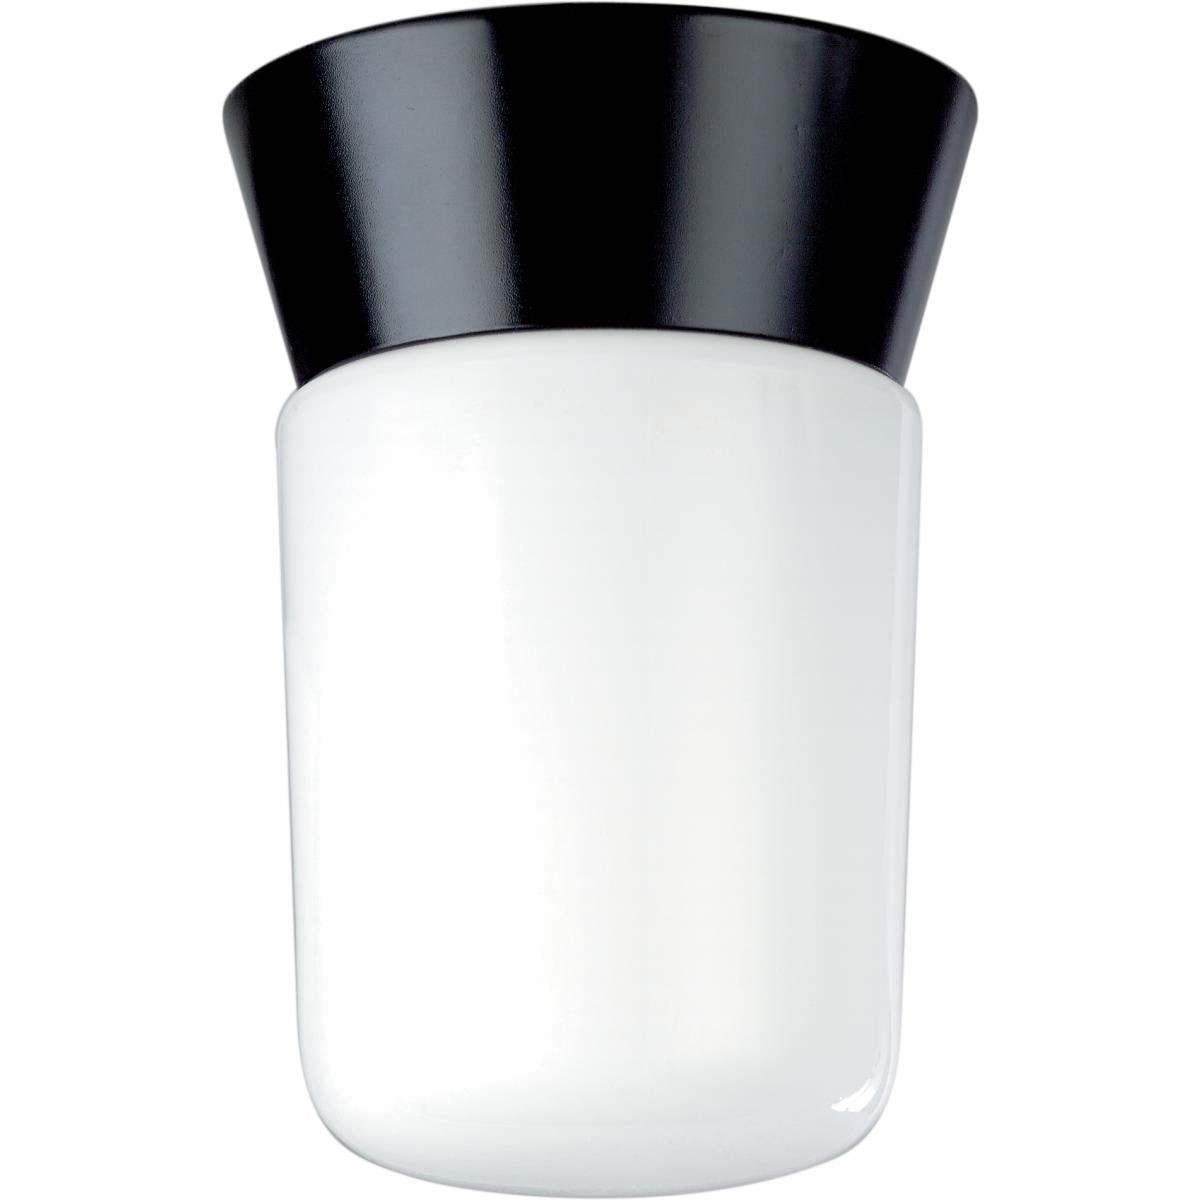 Satco 77-154 1 Light - 8" - Utility Ceiling Mount - With White Glass Cylinder - Black Finish